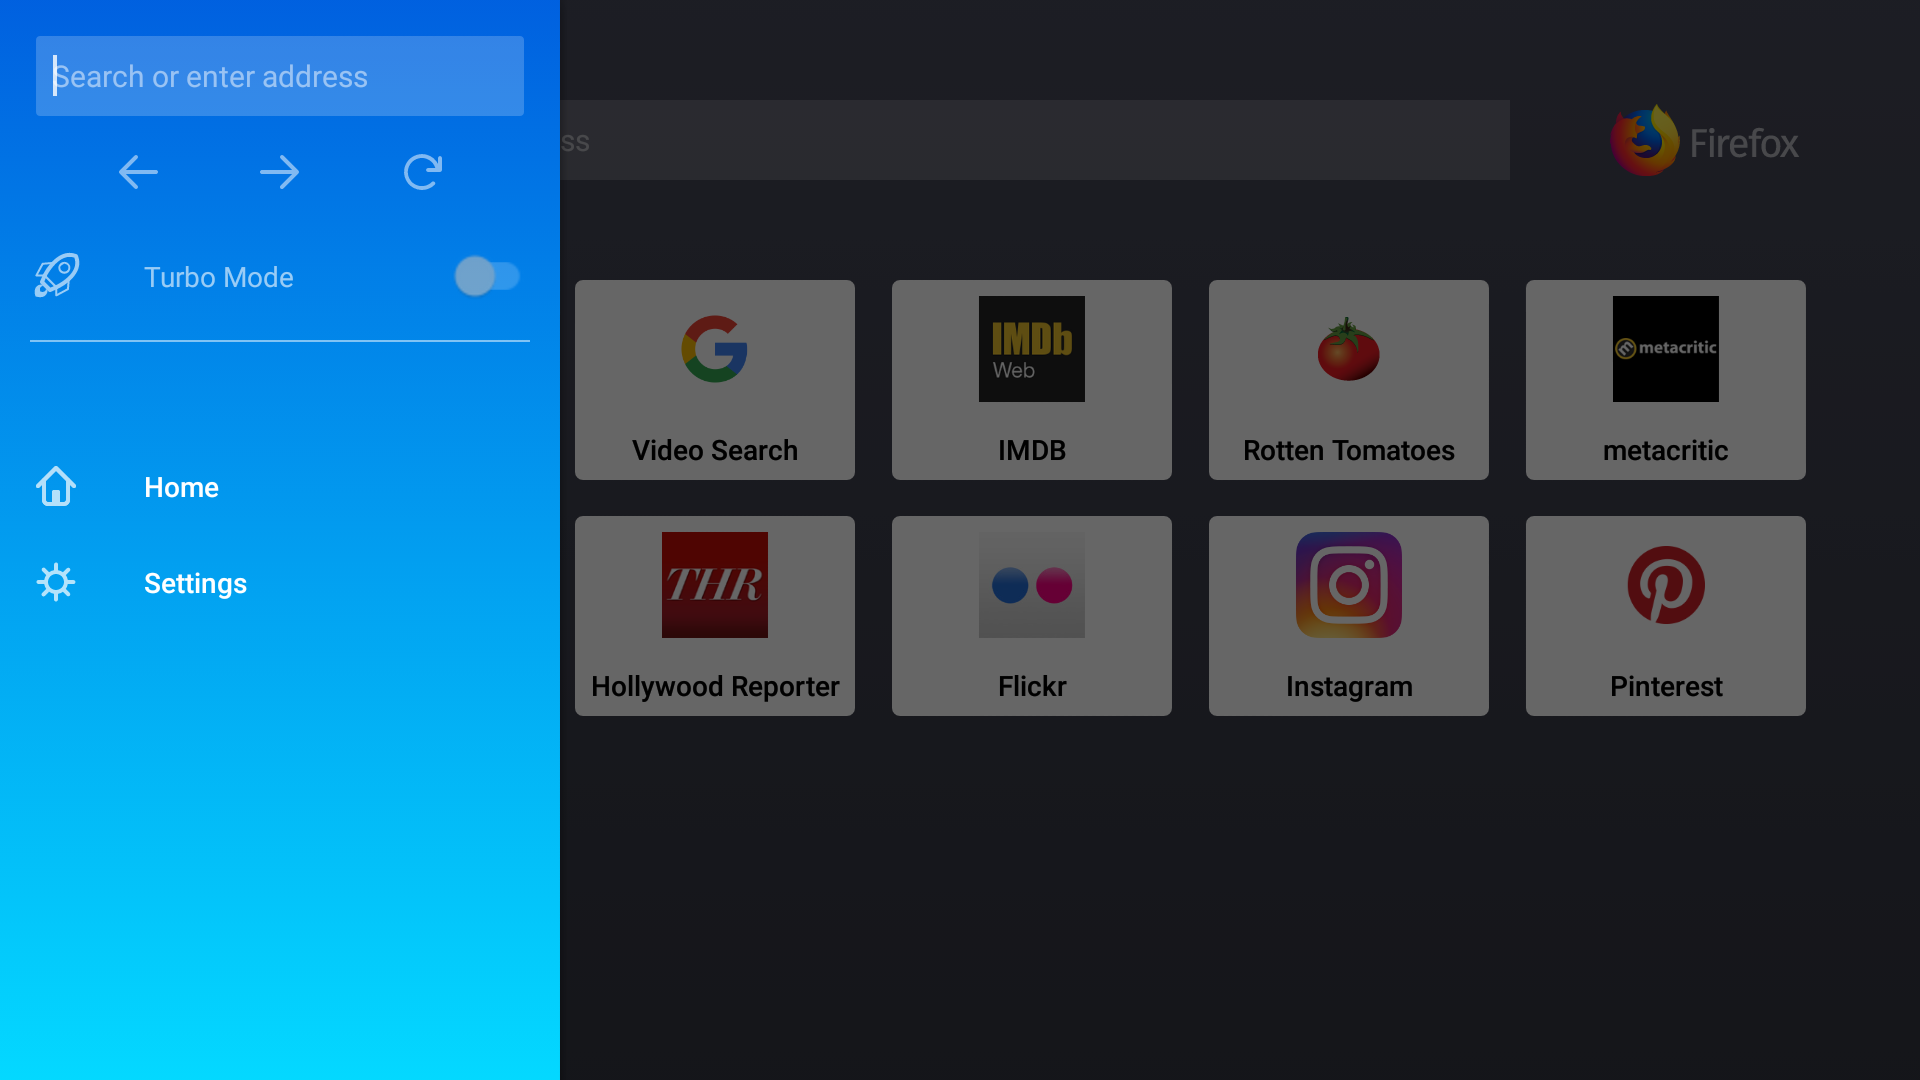 adds web browsing to Fire TV devices through Firefox and in